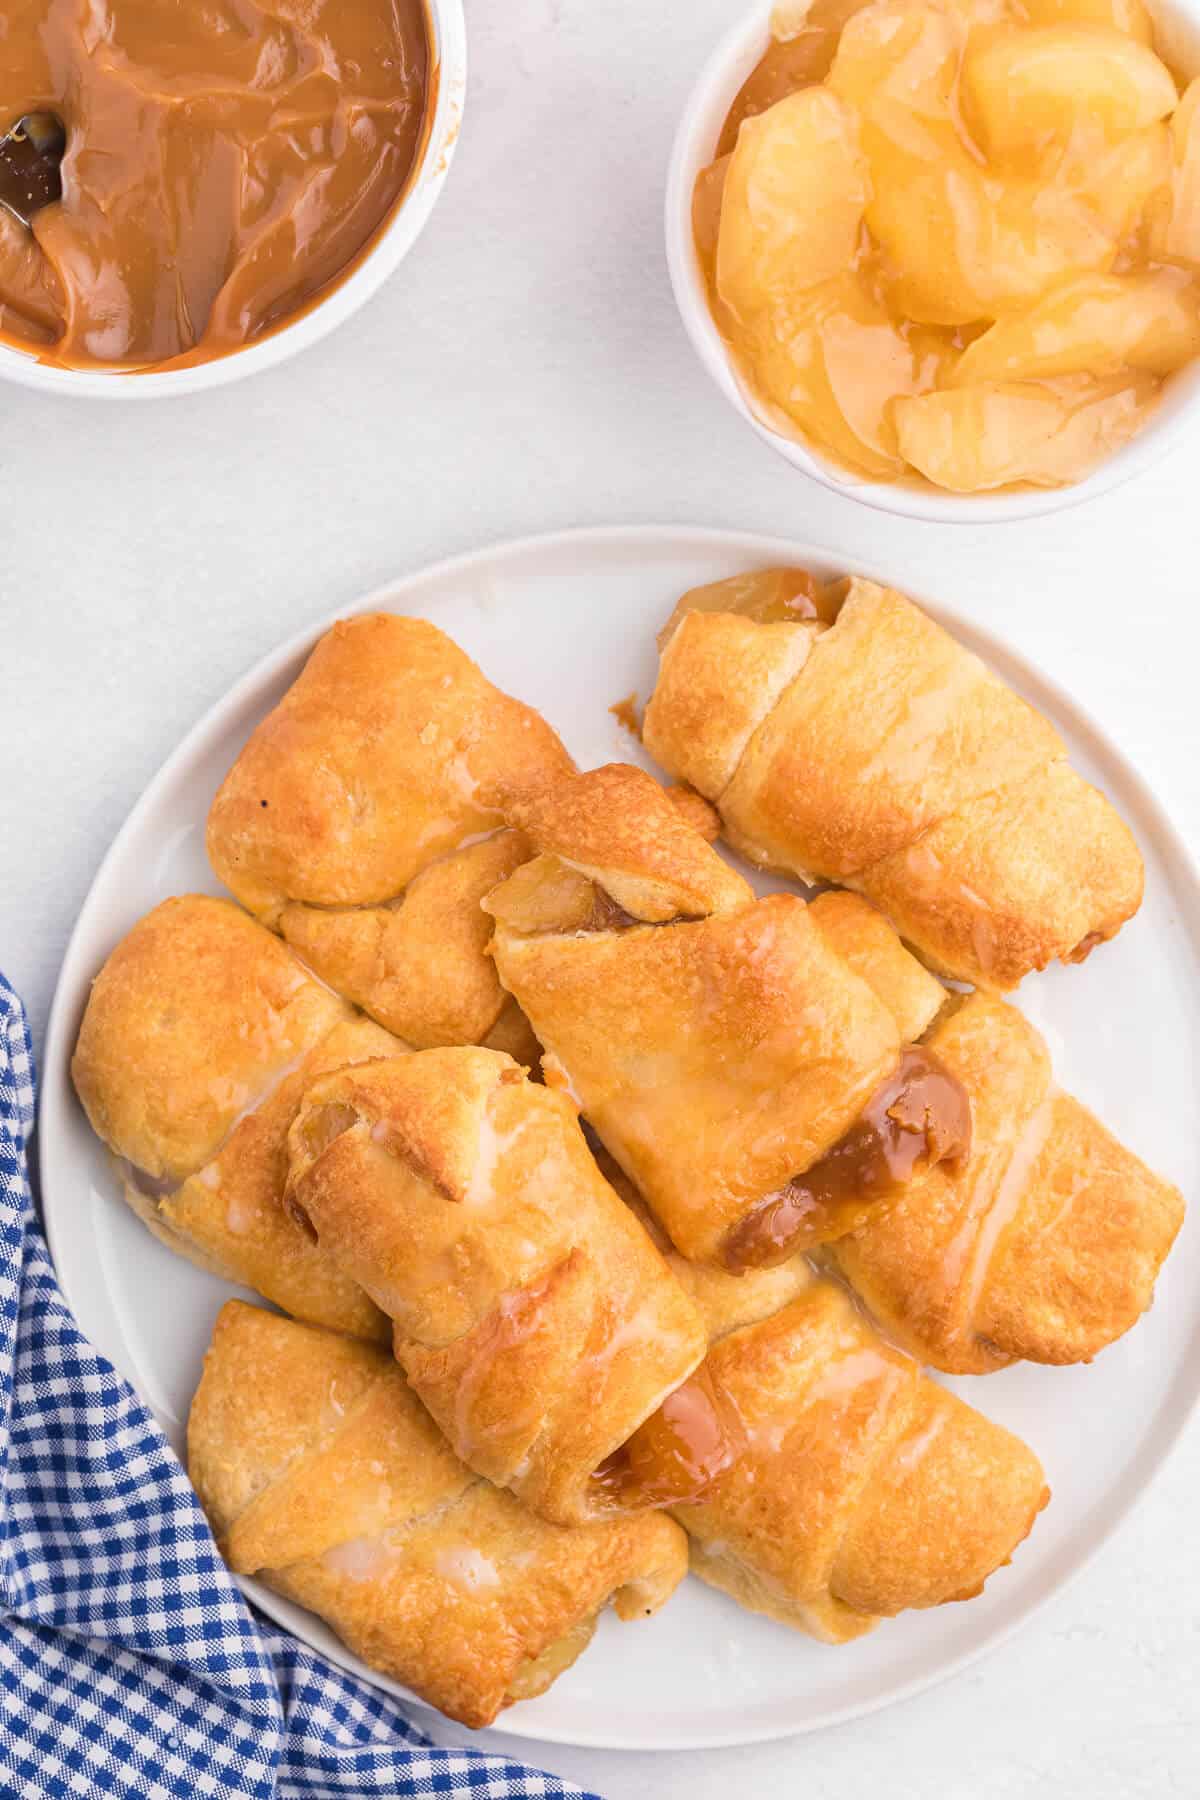 Caramel Apple Pie Crescents - The most simple apple dessert made in your air fryer in minutes! Buttery golden crescent roll pastry is wrapped around sweet apple pie filling and caramel with a sugar drizzle on top.